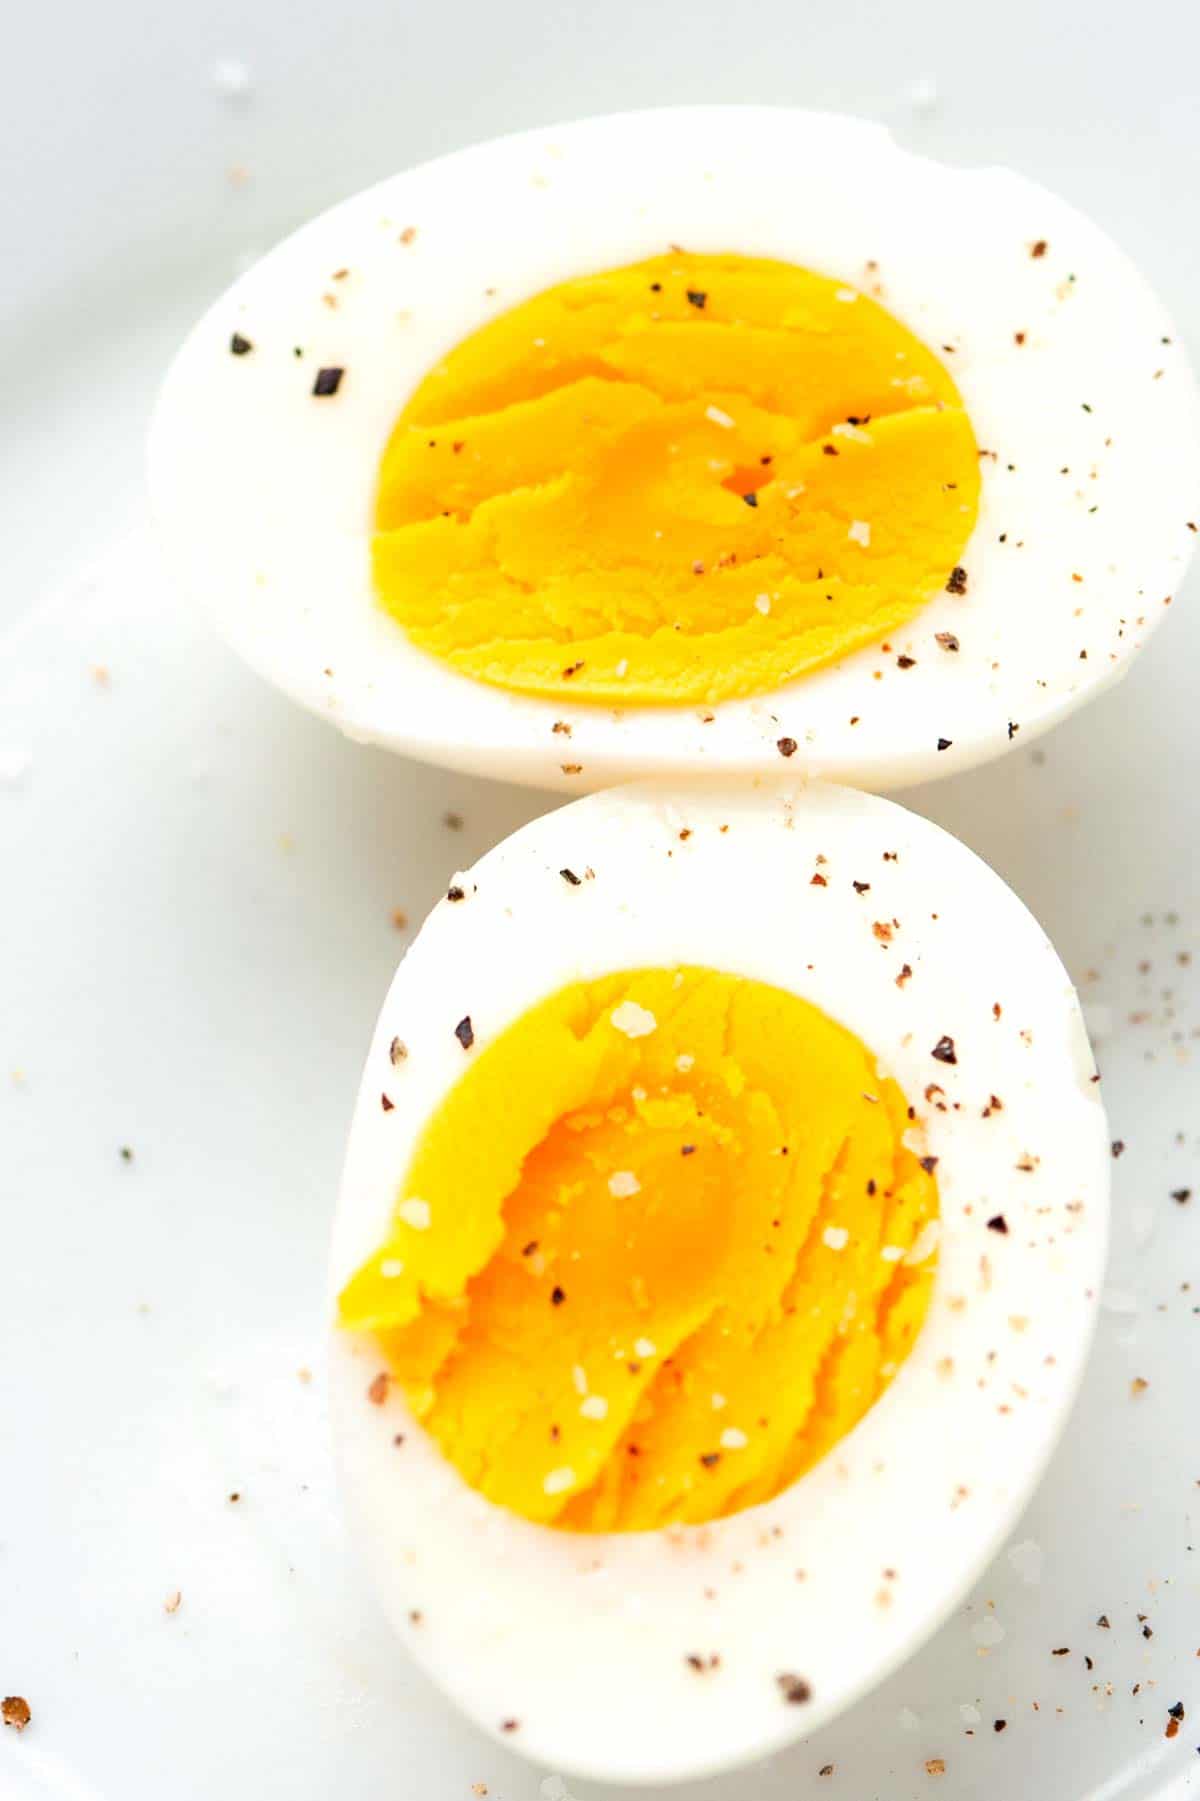 How to Cook Hard Boiled Eggs